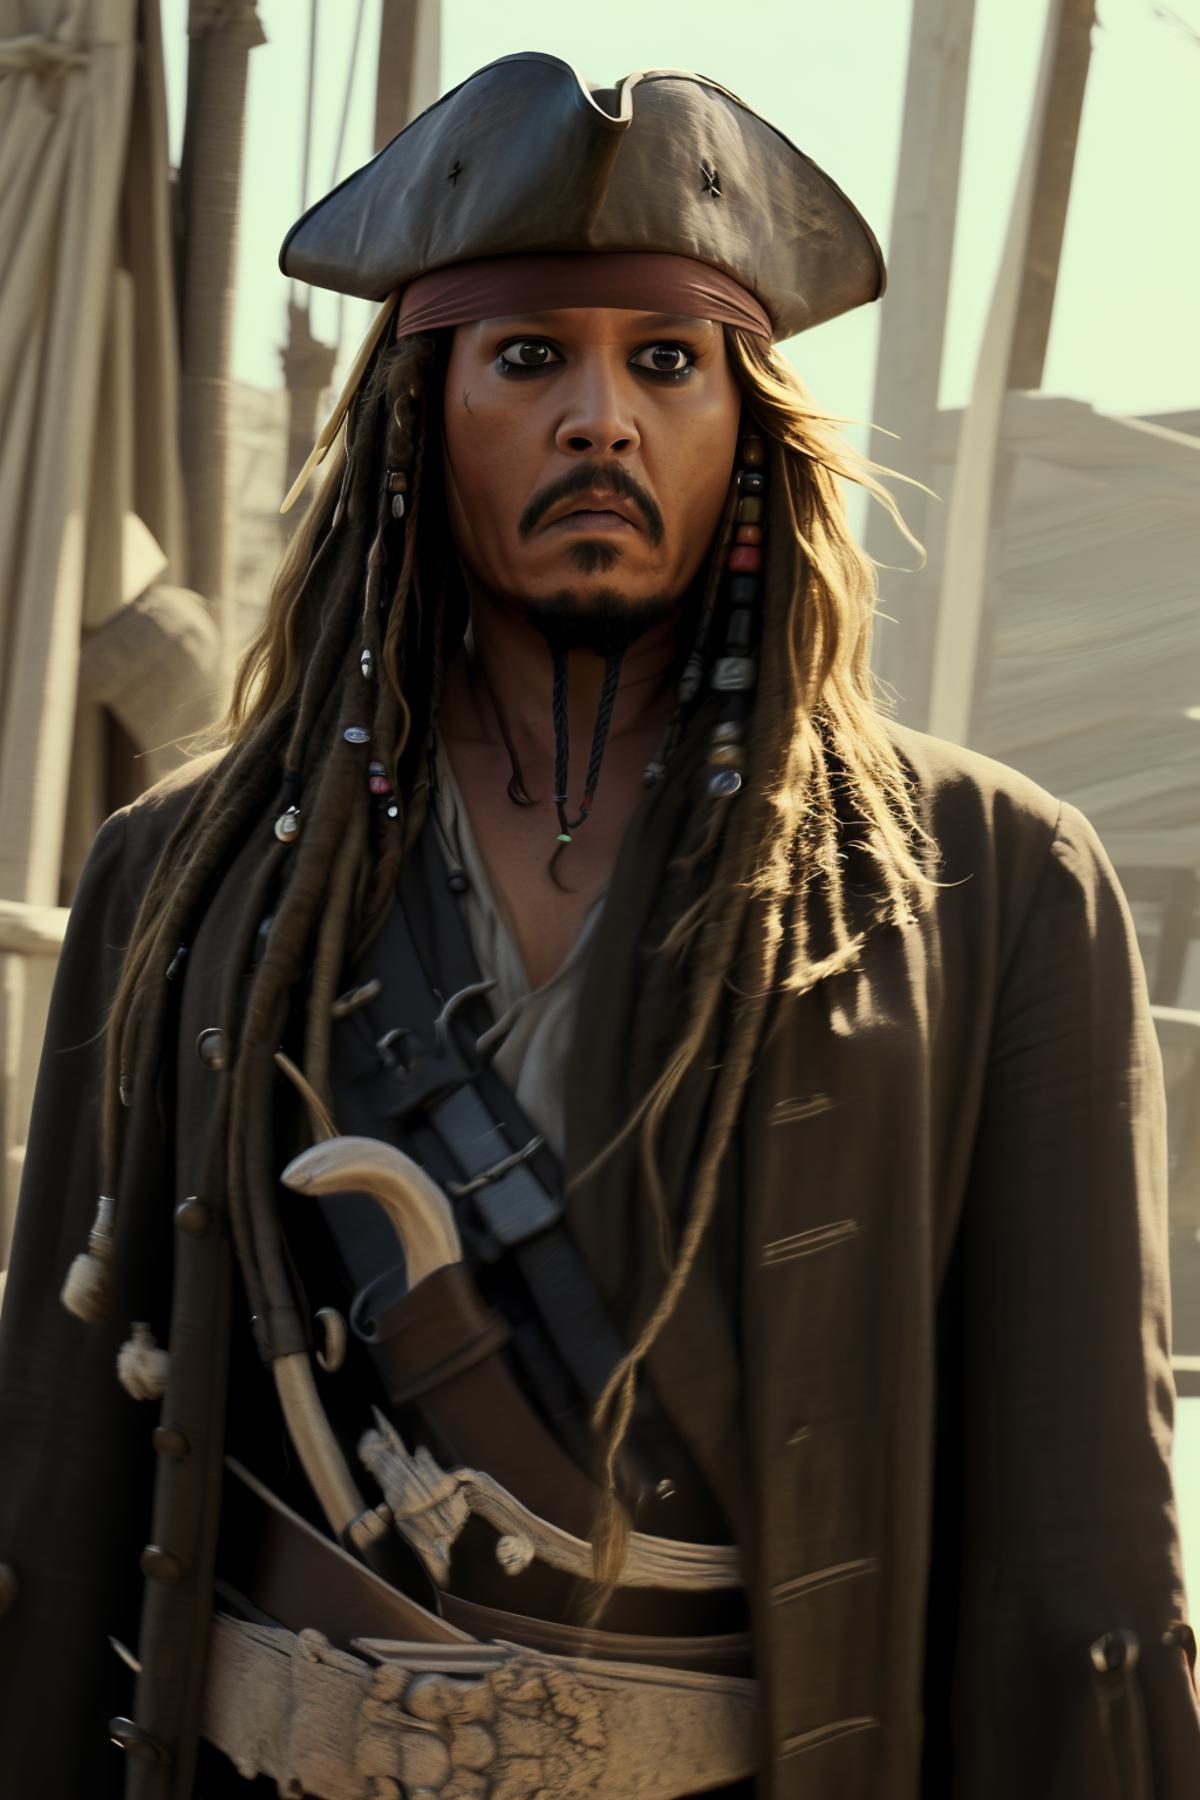 jack sparrow/加勒比海盗5/Pirates of the Caribbean image by mmmilk